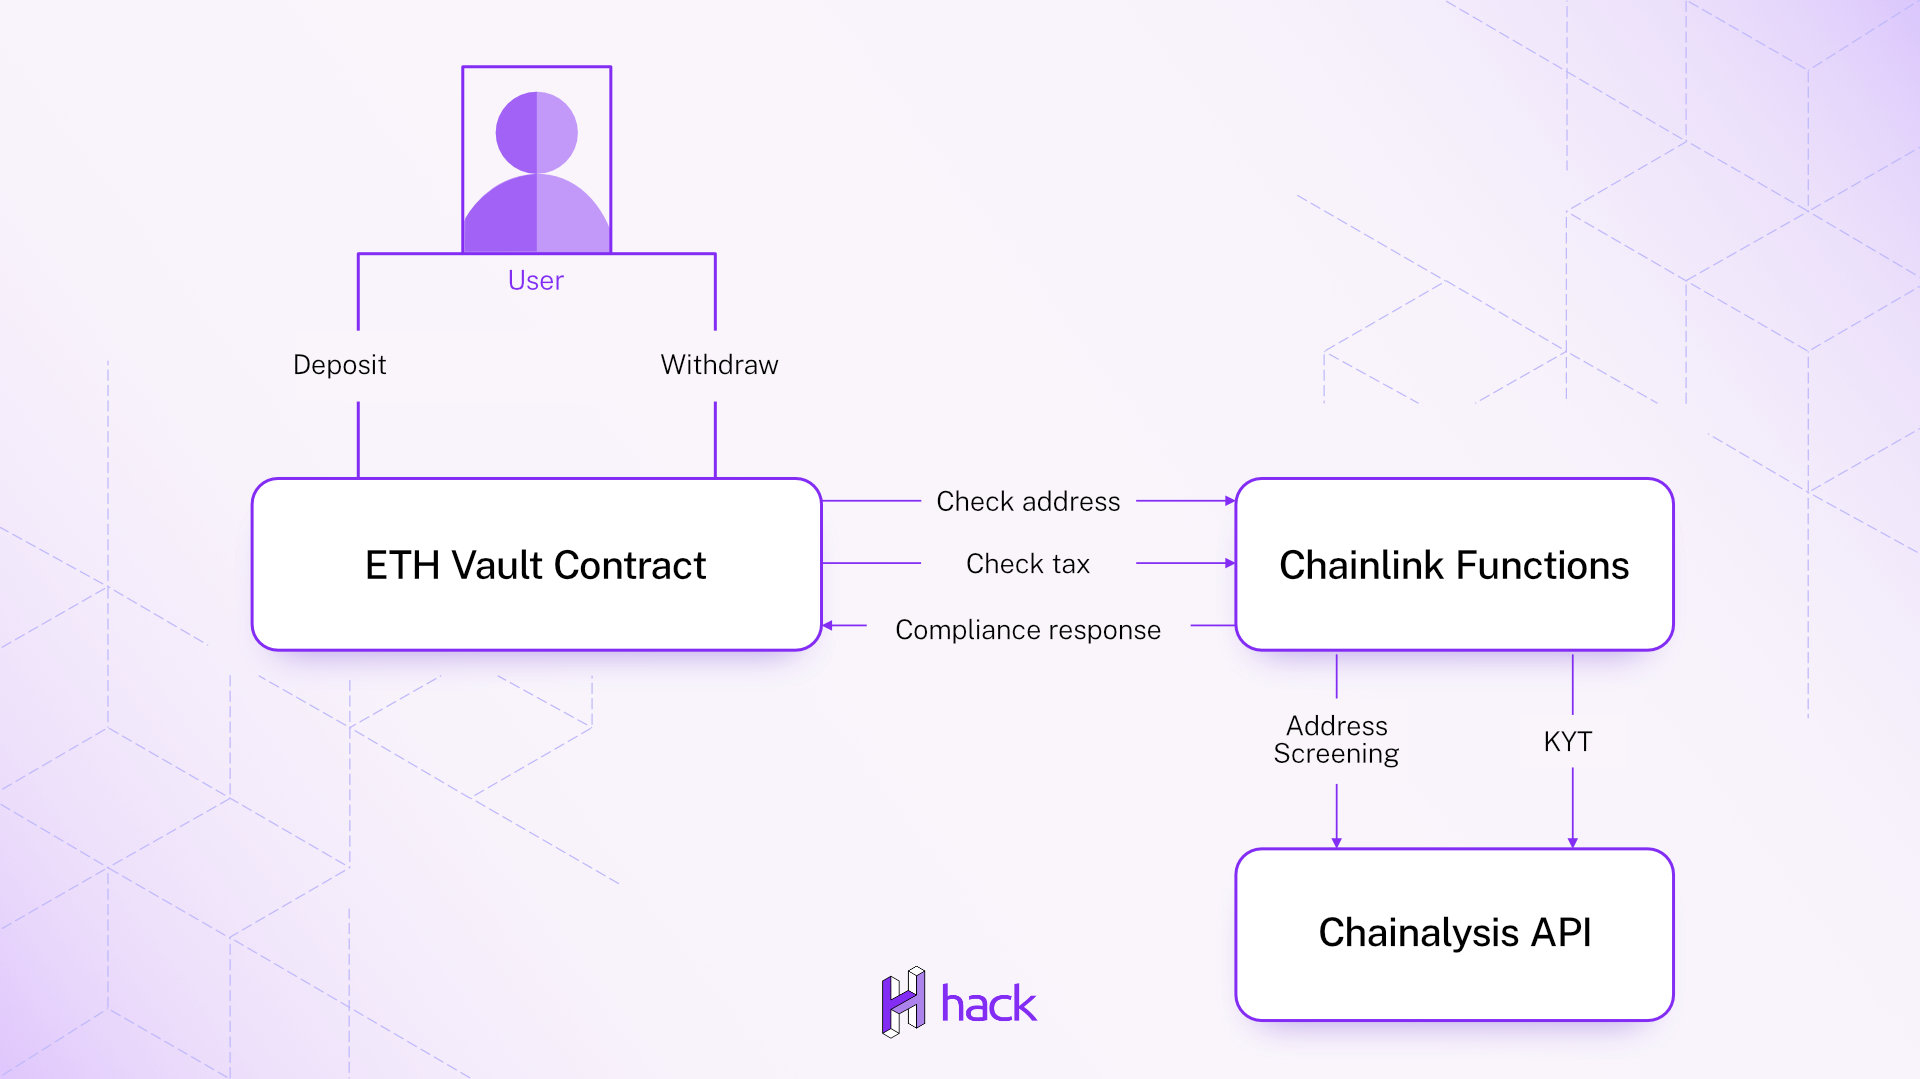 Case Study: Chainlink Functions & Chainalysis Integration for Compliant On-Chain Finance